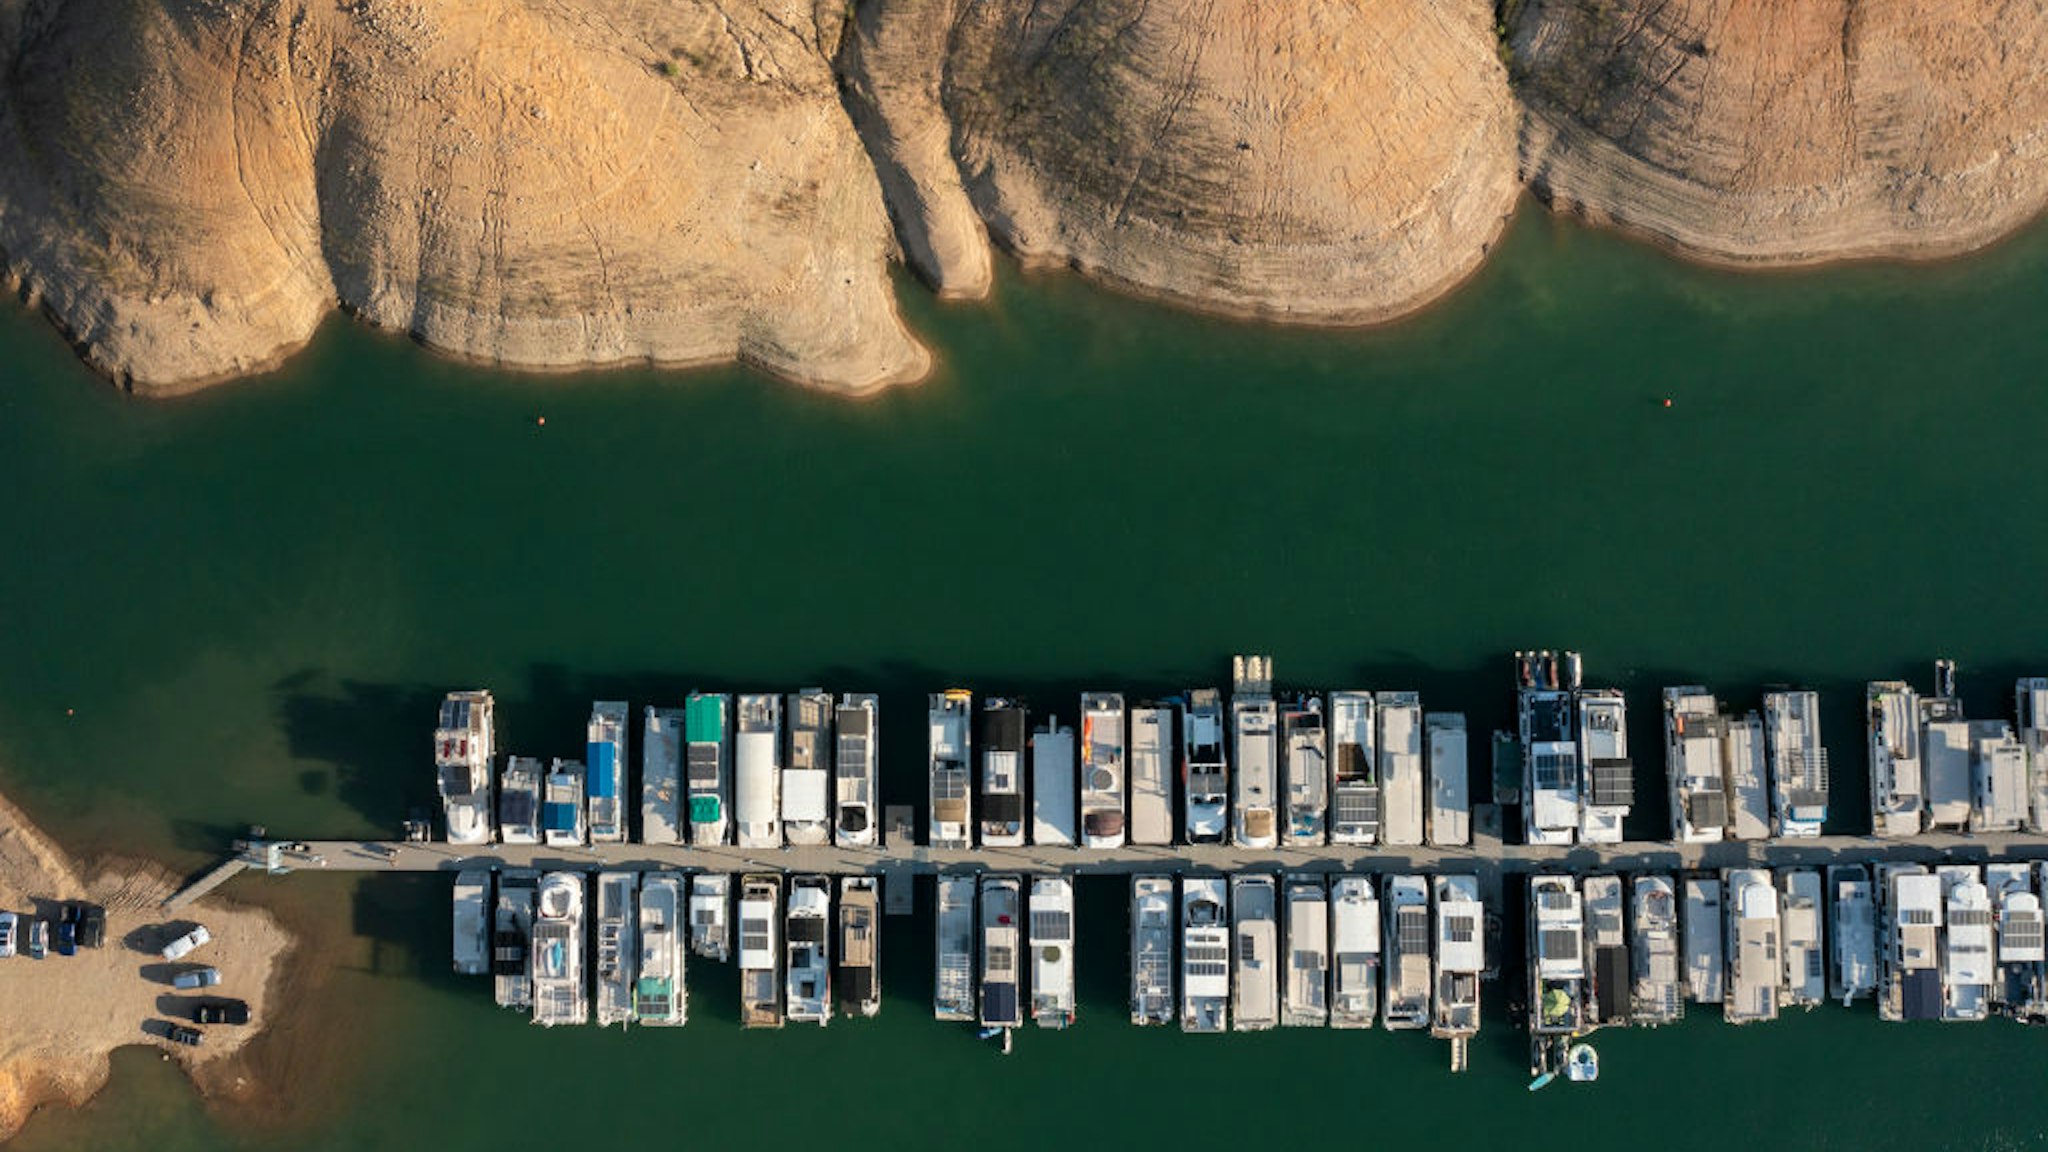 REDDING, CA - AUGUST 5: In an aerial view, boasts are docks near bare ground at drought-stricken Lake Shasta, which is ringed with formerly submerged land, on July 5, 2022 near Redding, California. Scientists are calling today's megadrought the driest 22-year stretch in more than 1,200 years, with major California reservoirs dwindling to a fraction of their capacity and no end in sight to when or if a normal Sierra Nevada Mountains snowpack or winter rains could return to refill them.